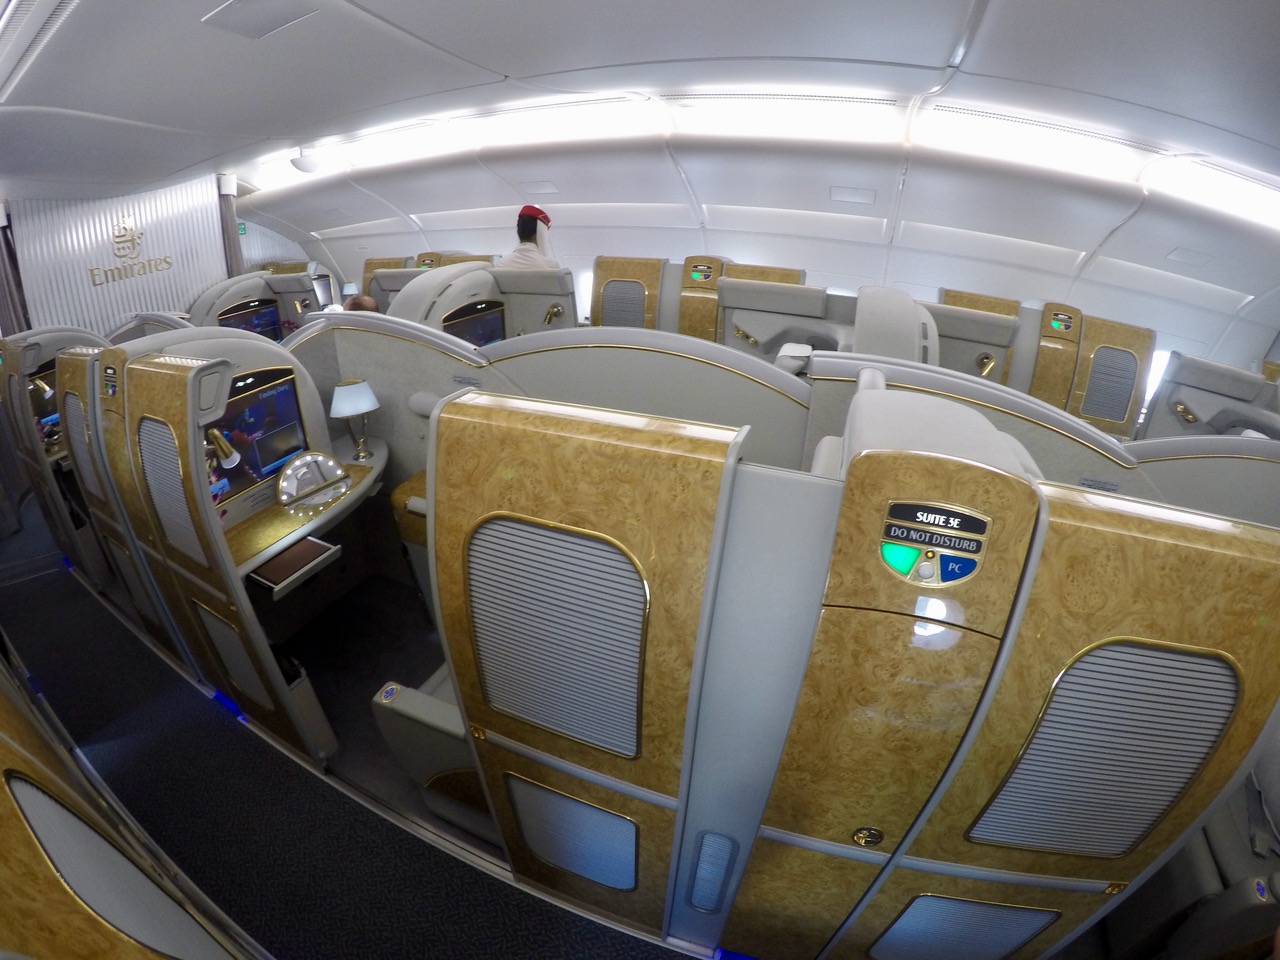 Emirates A380 first class overview | Point Hacks